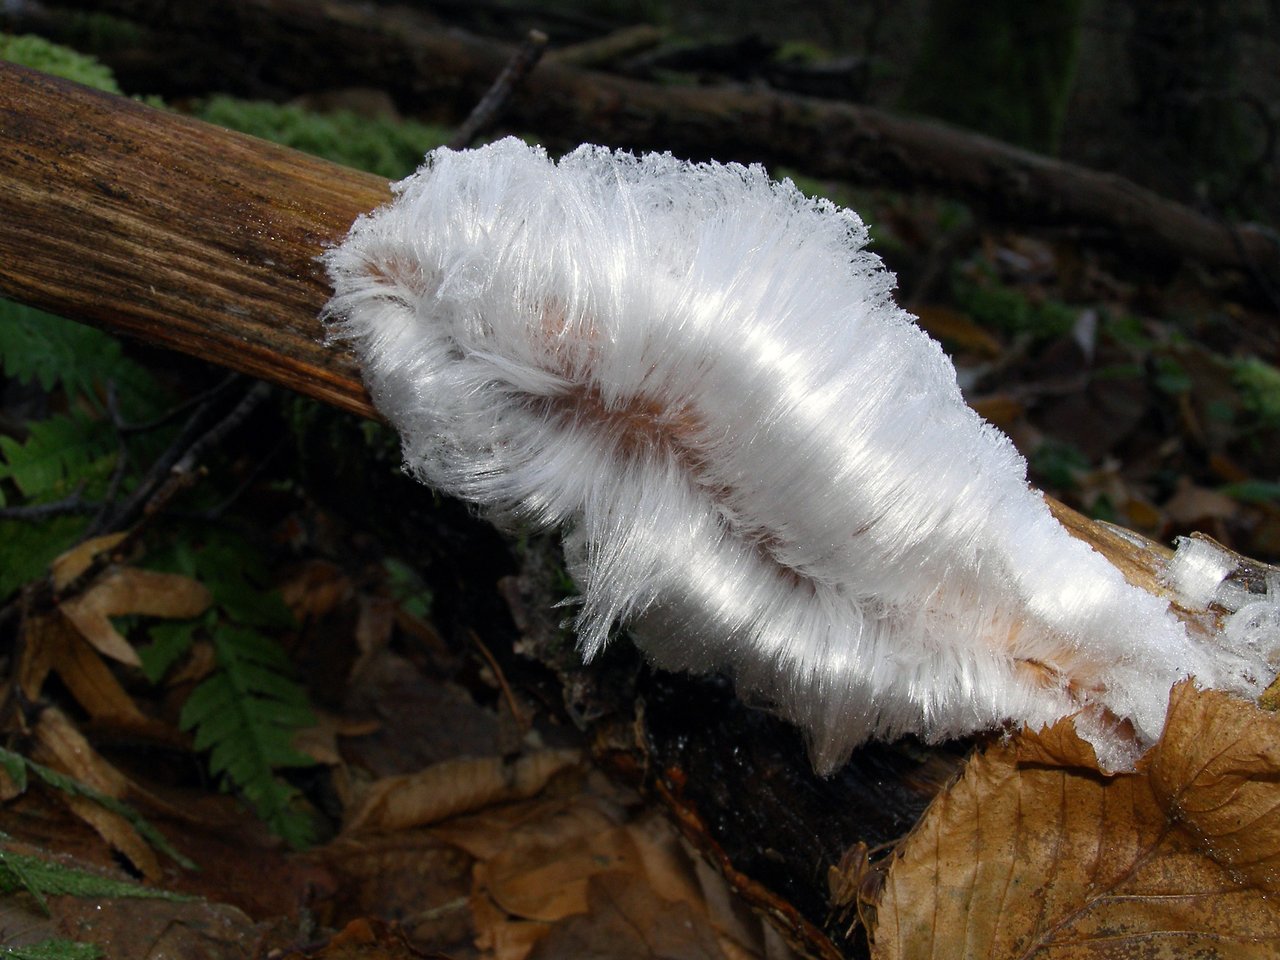 Peculiar shape of hair ice linked to fungus